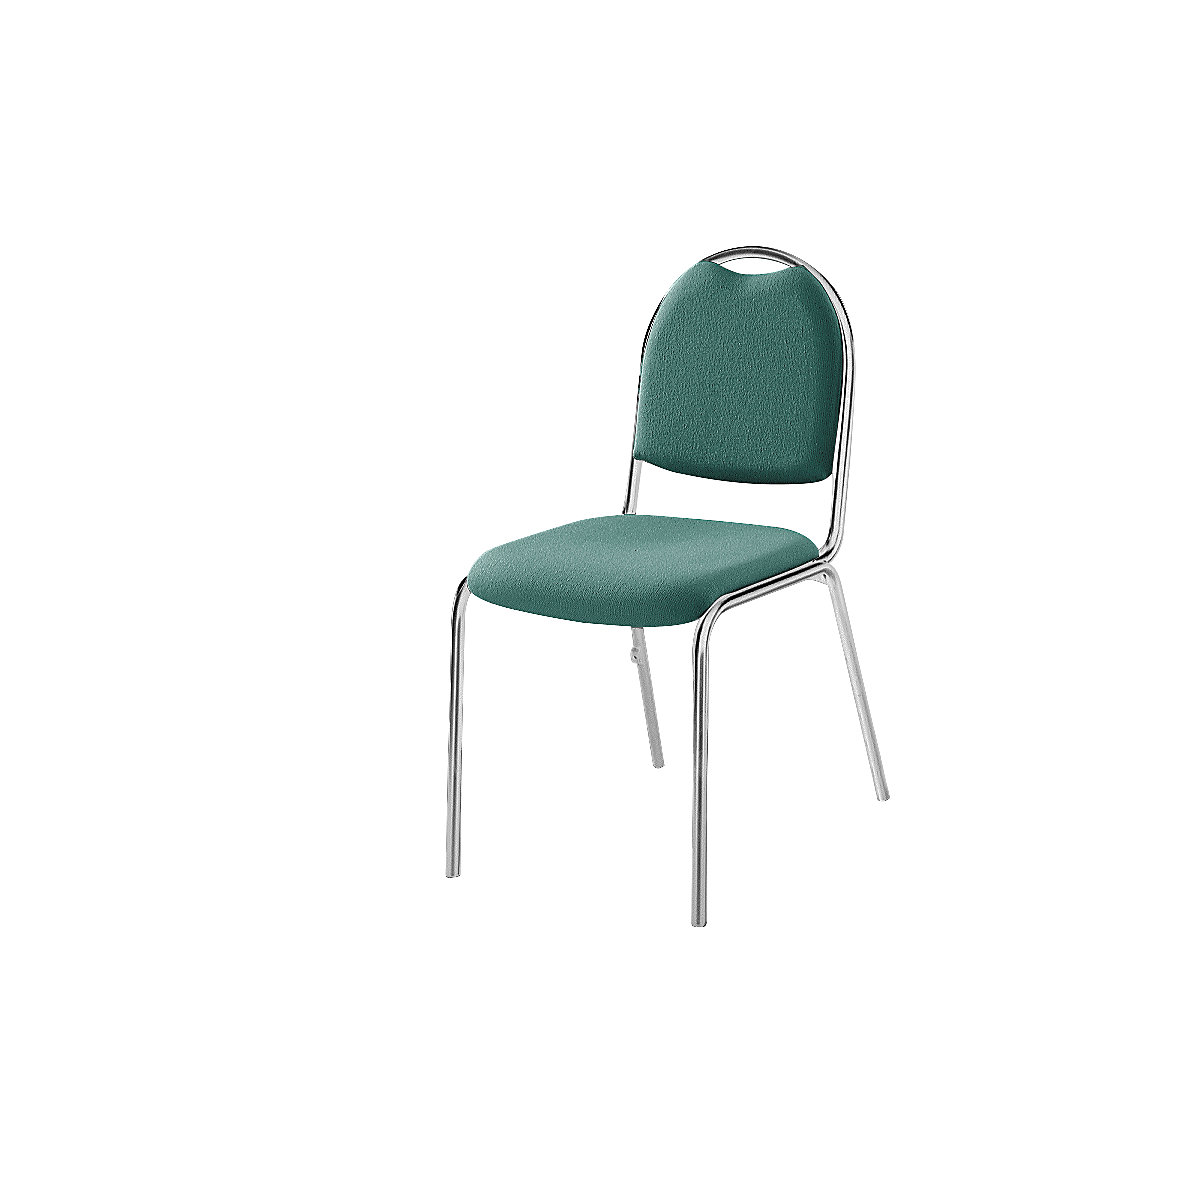 Conference and meeting room chair - eurokraft pro